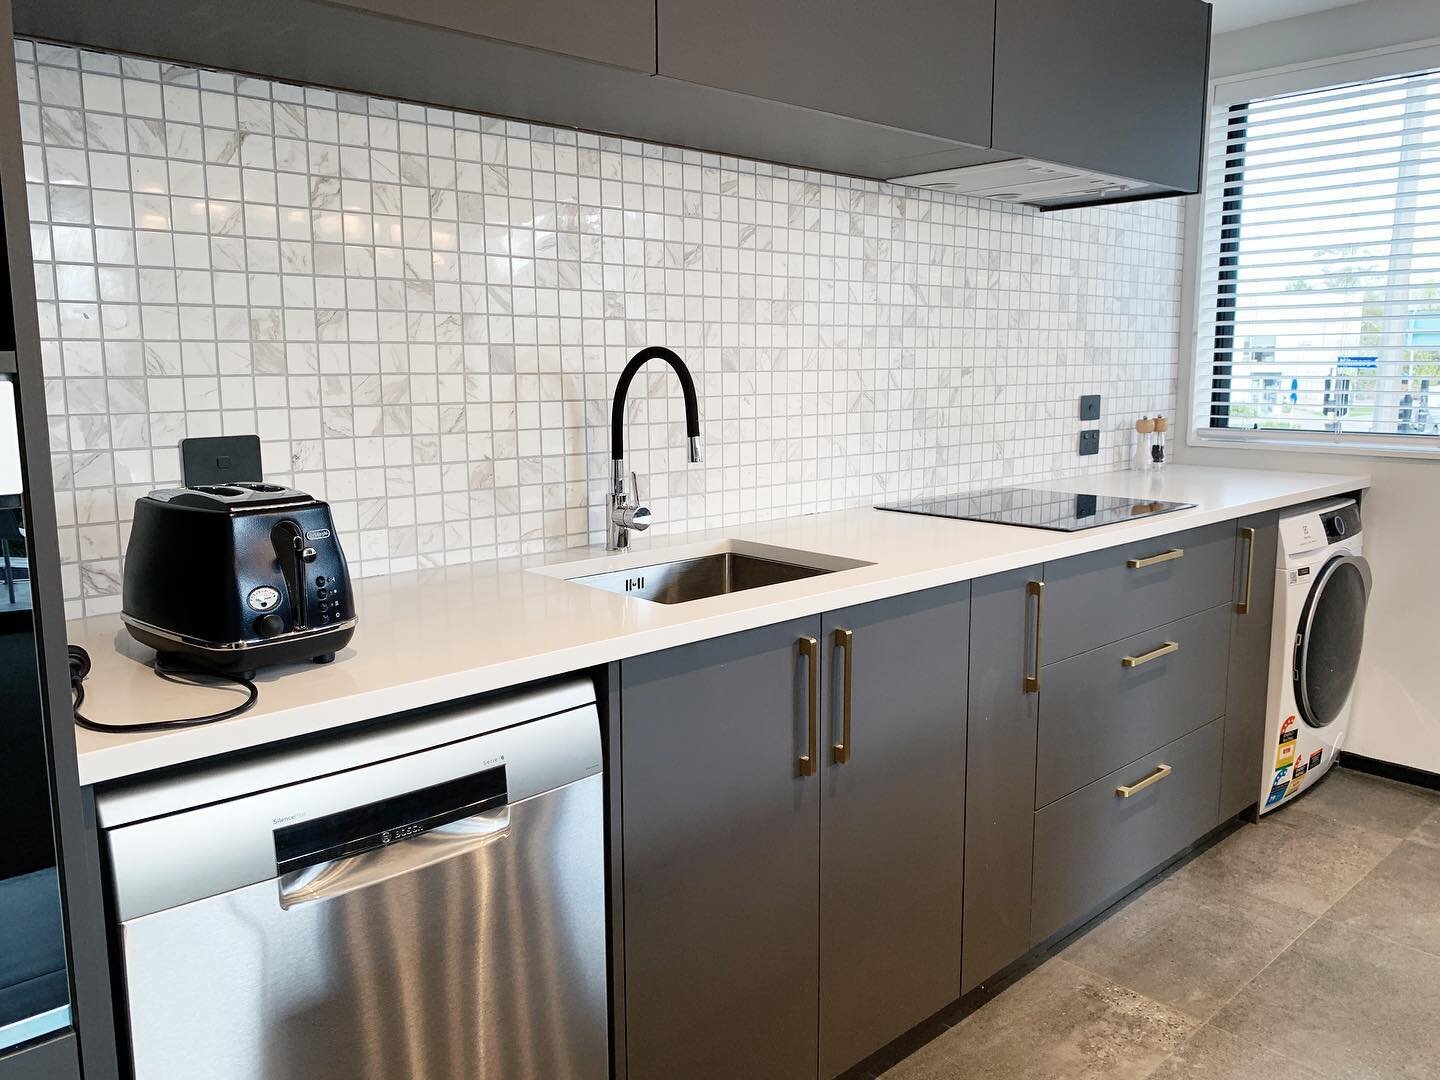 Simple modern with a touch of brass 

#kitchenandbathroomdesign #kitchendesign #kitchendesignideas #kitchencabinets #kitchendesignnz #apartmentkitchendesign